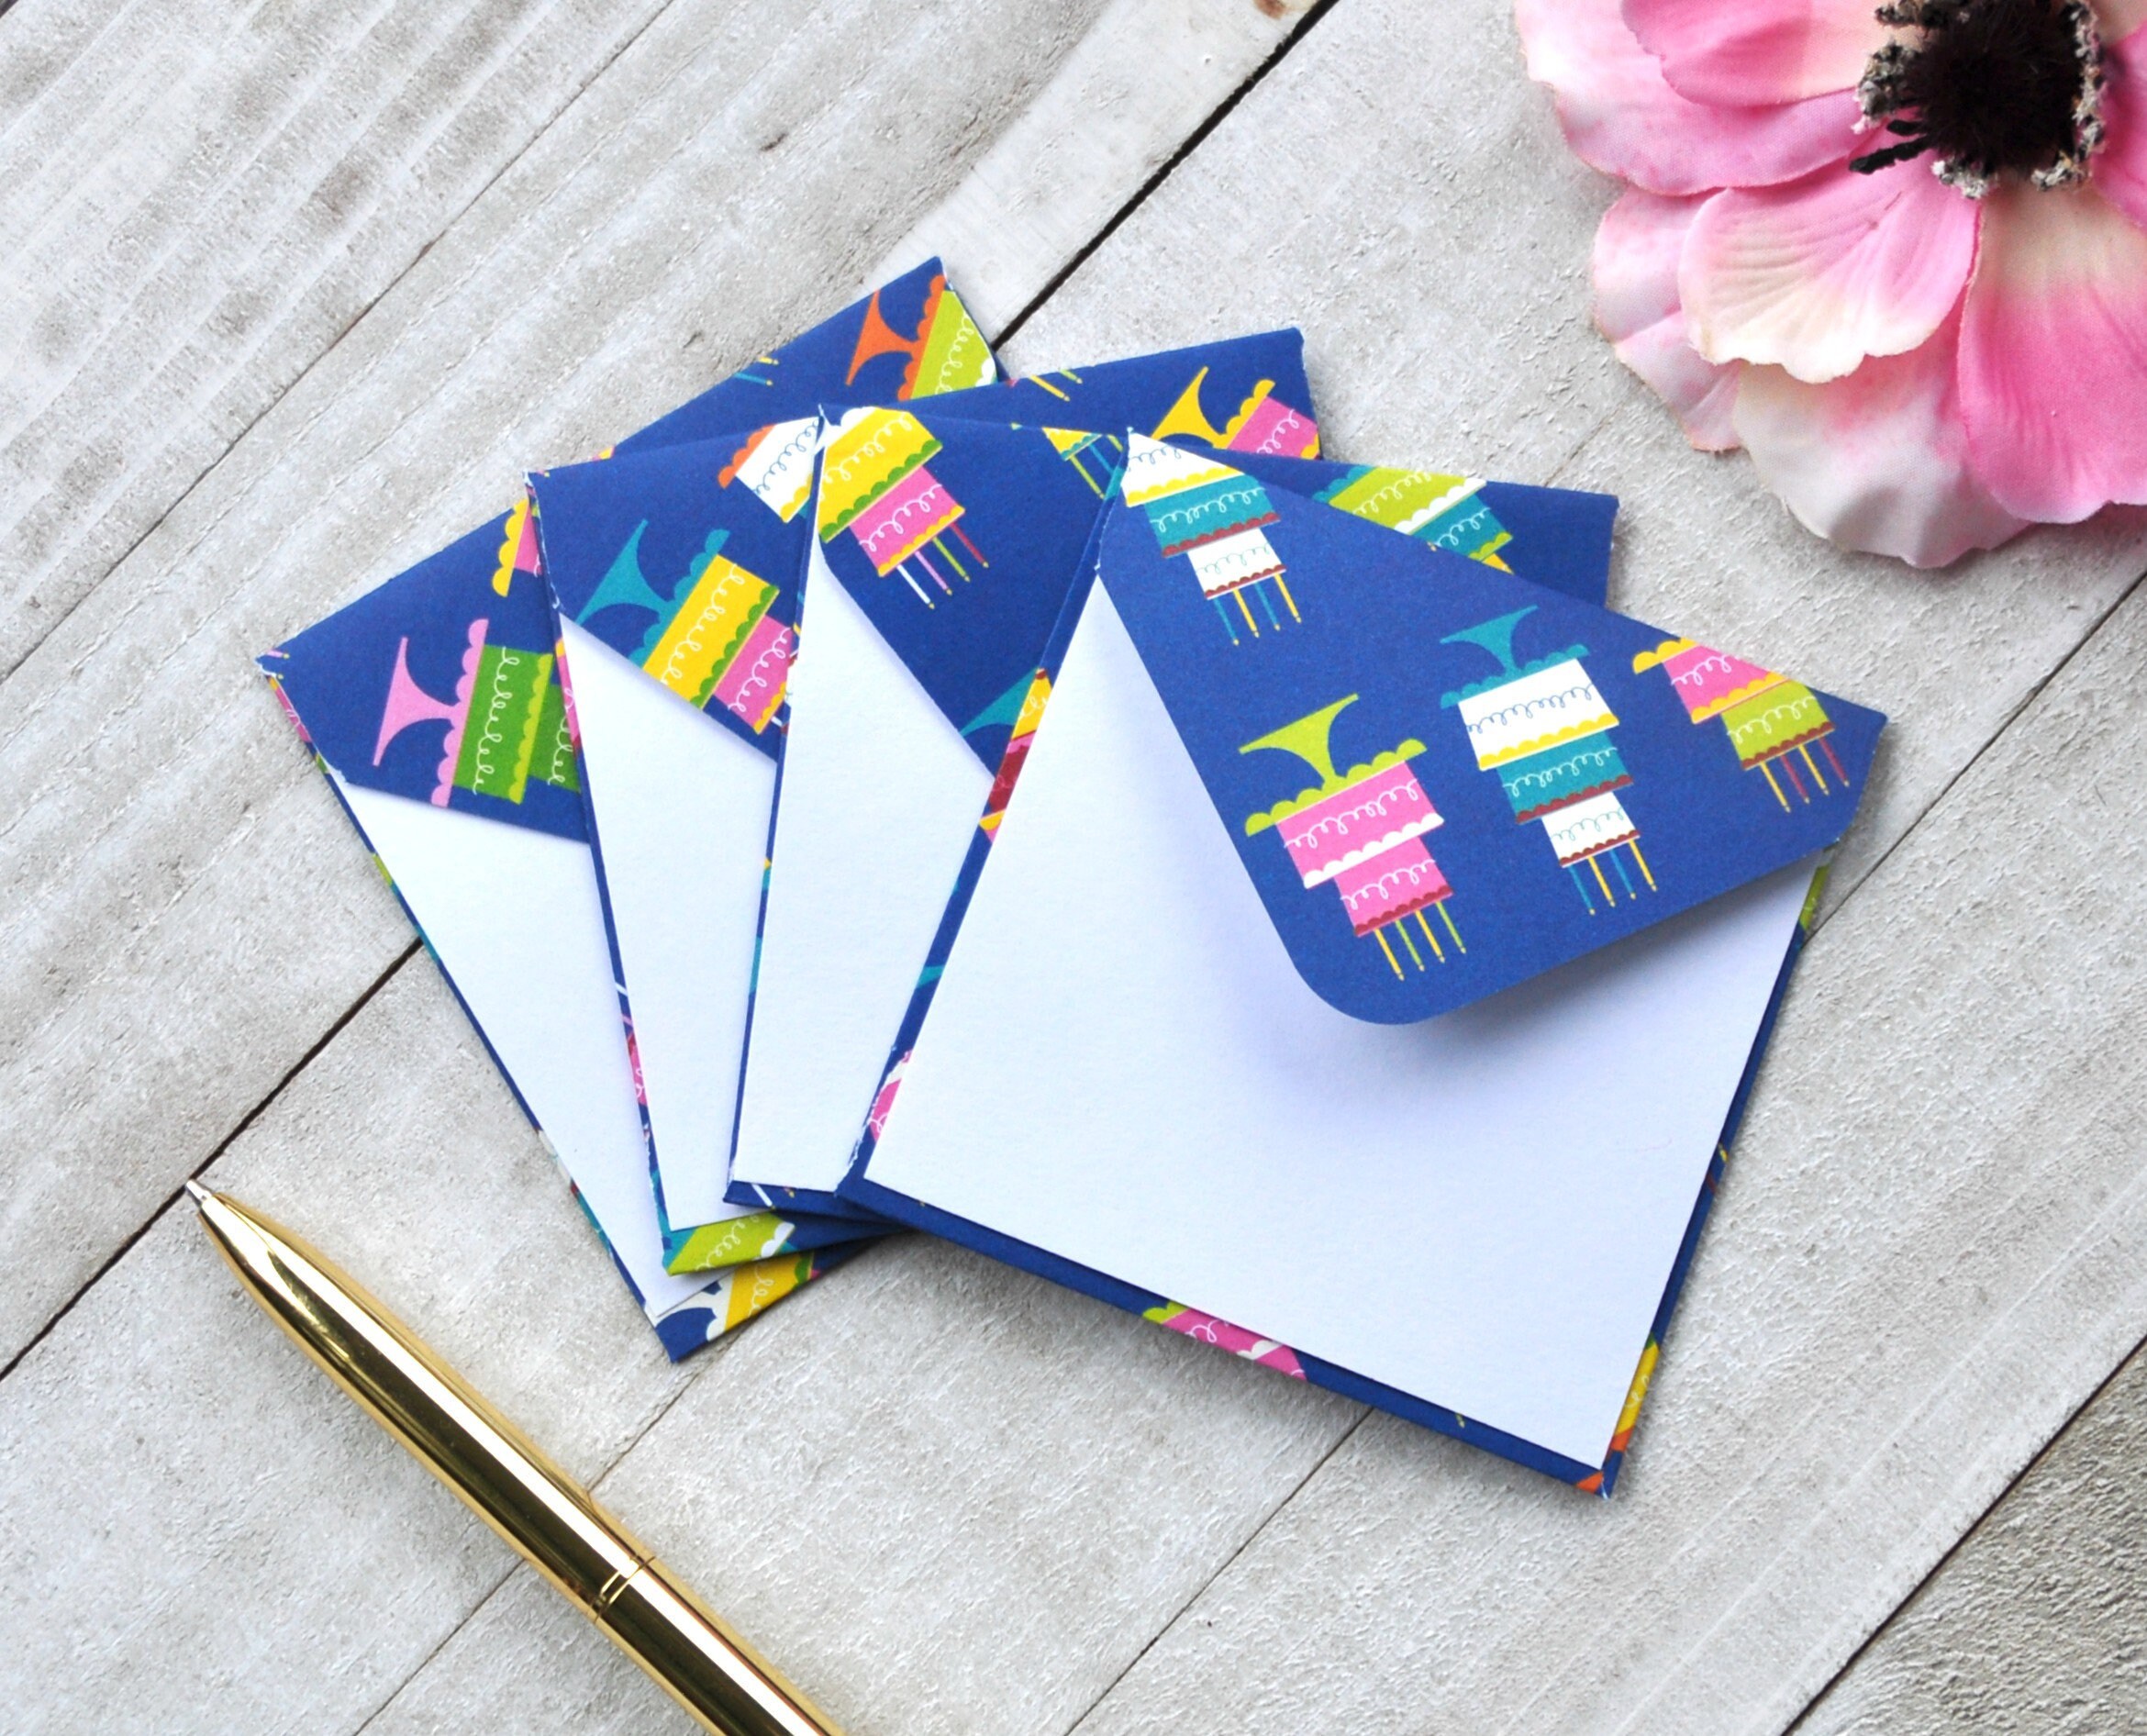 Mini Note Cards Mini Notecards Assorted Color Tri-fold Envelope Mini Note Cards  Mini Note Card Small Blank Cards 20 Blank Notecards 